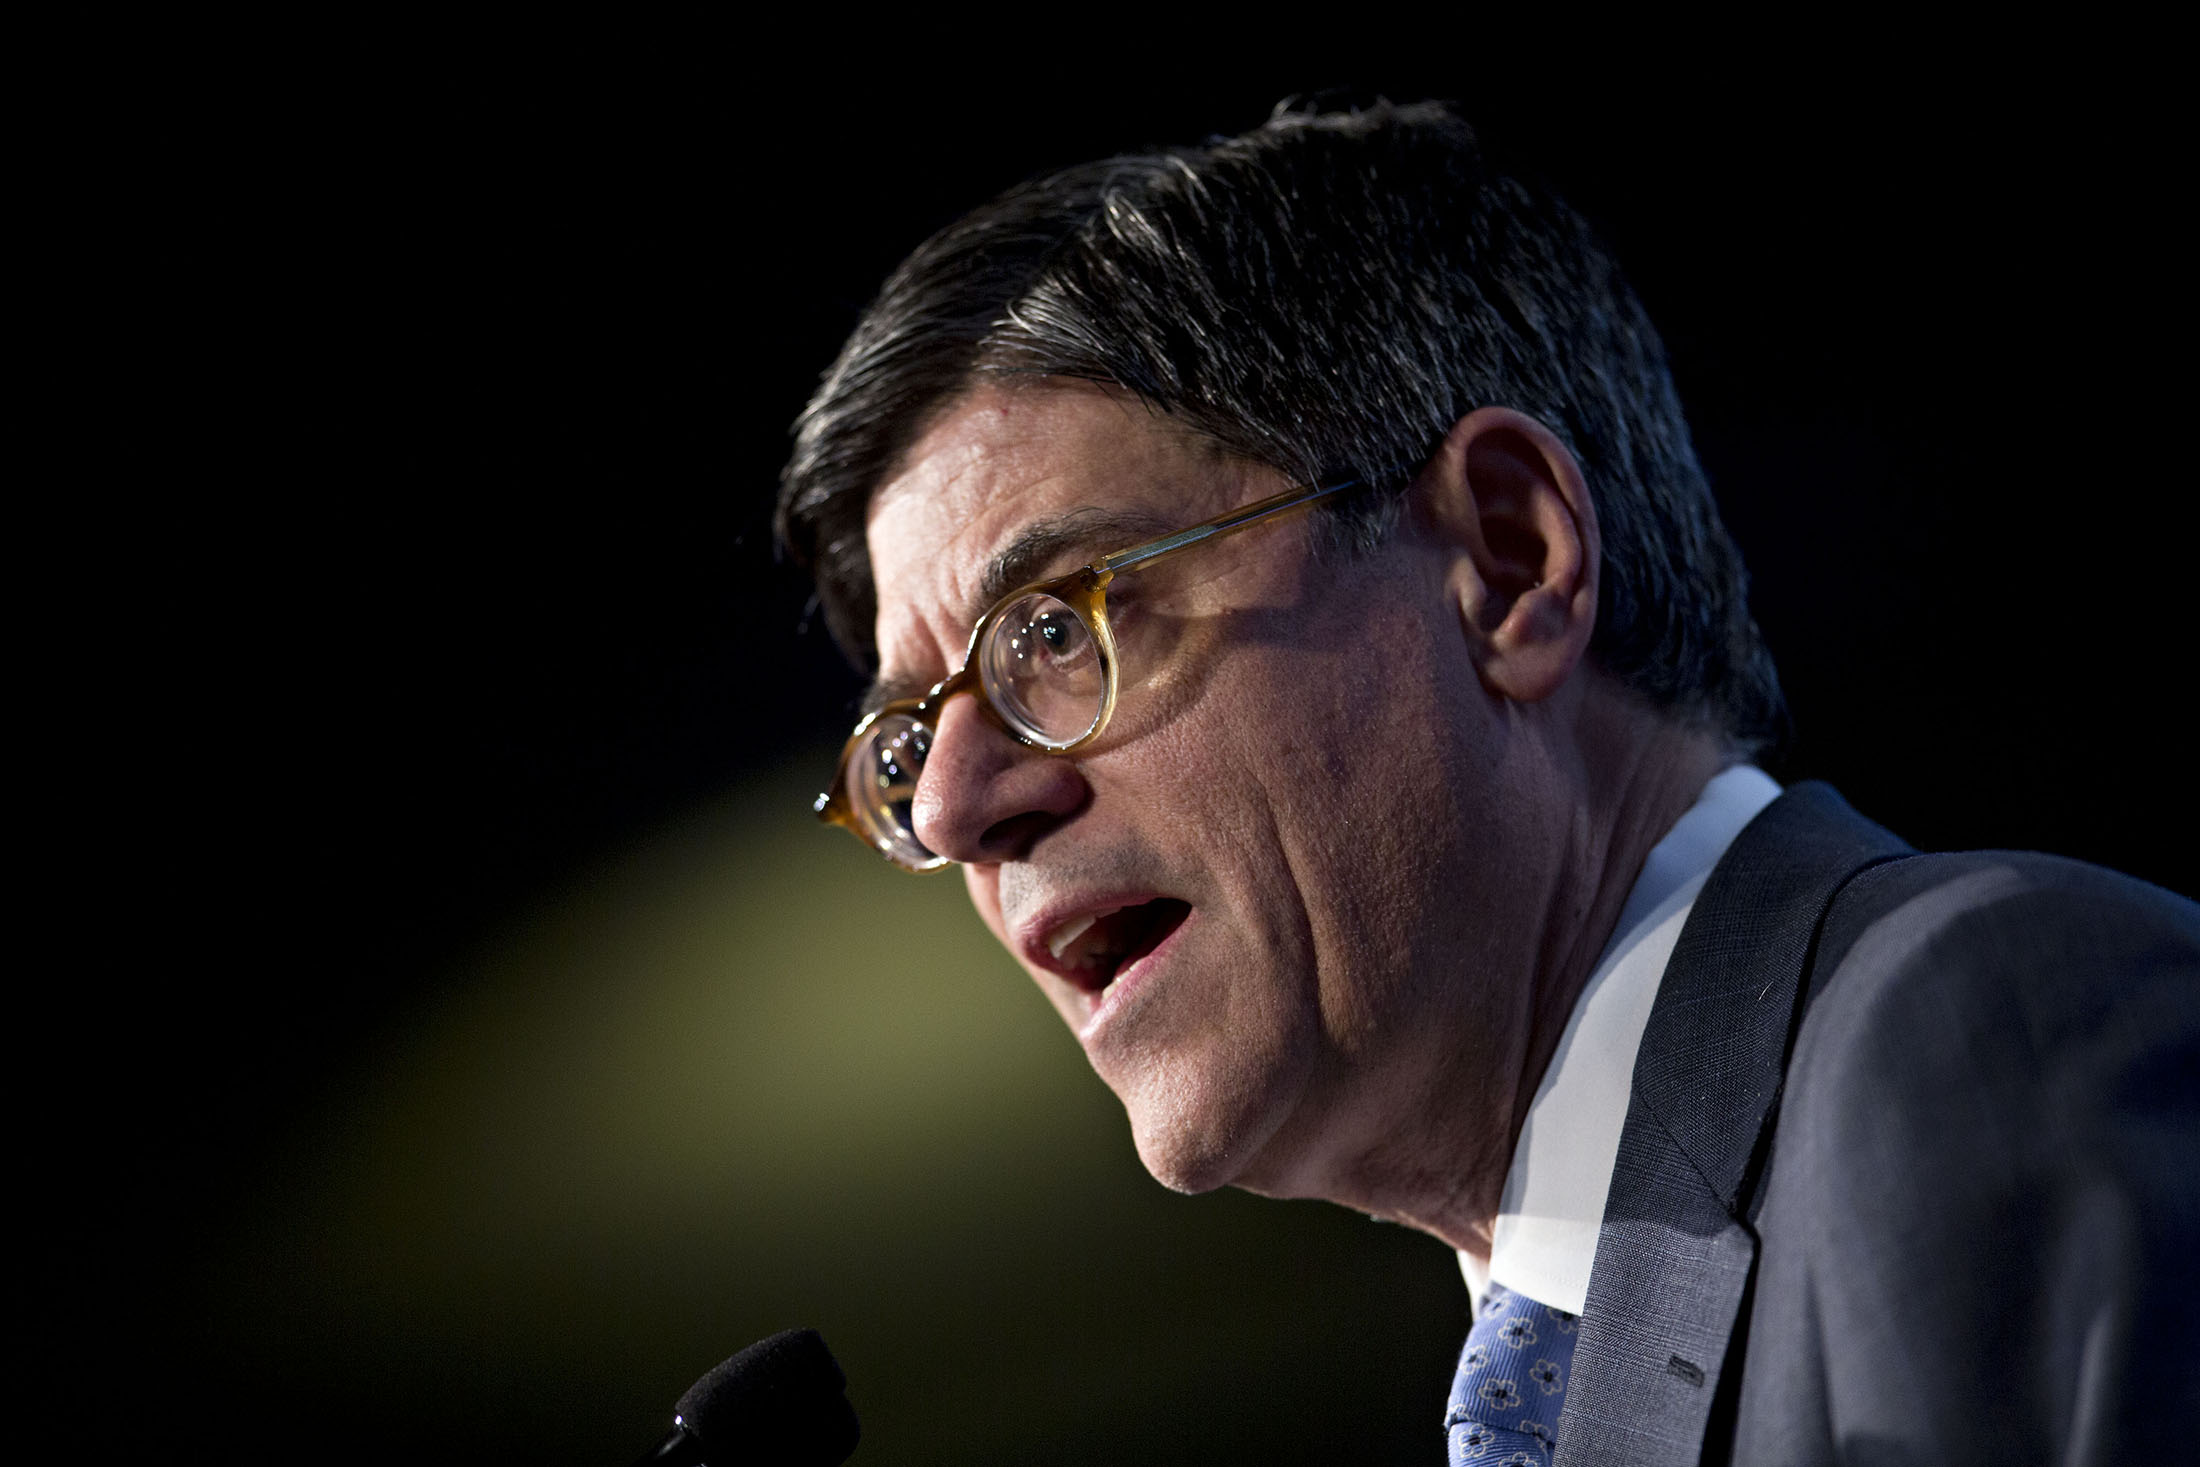 Jacob 'Jack' Lew, U.S. Treasury secretary, speaks at a news conference during the spring meetings of the International Monetary Fund (IMF) and World Bank in Washington, D.C., U.S., on Friday, April 15, 2016. Group of 20 economies threatened today to penalize tax havens that donÕt share information on their banking clients, after the leak of the Panama Papers provoked a global uproar over tax evasion.
